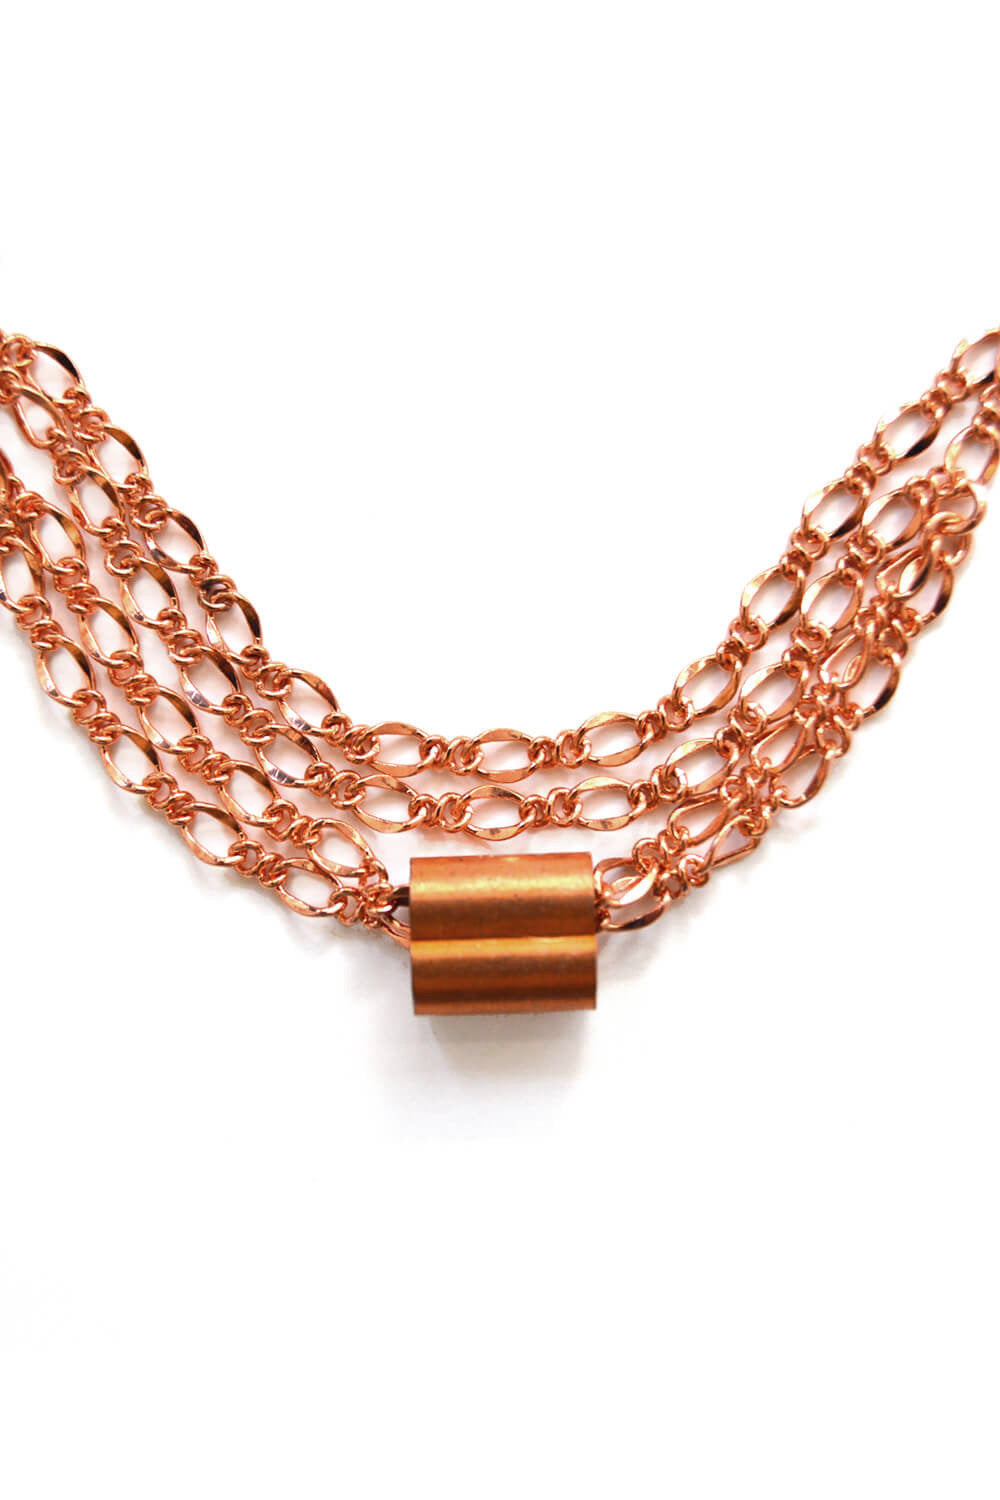 sunset necklace - copper